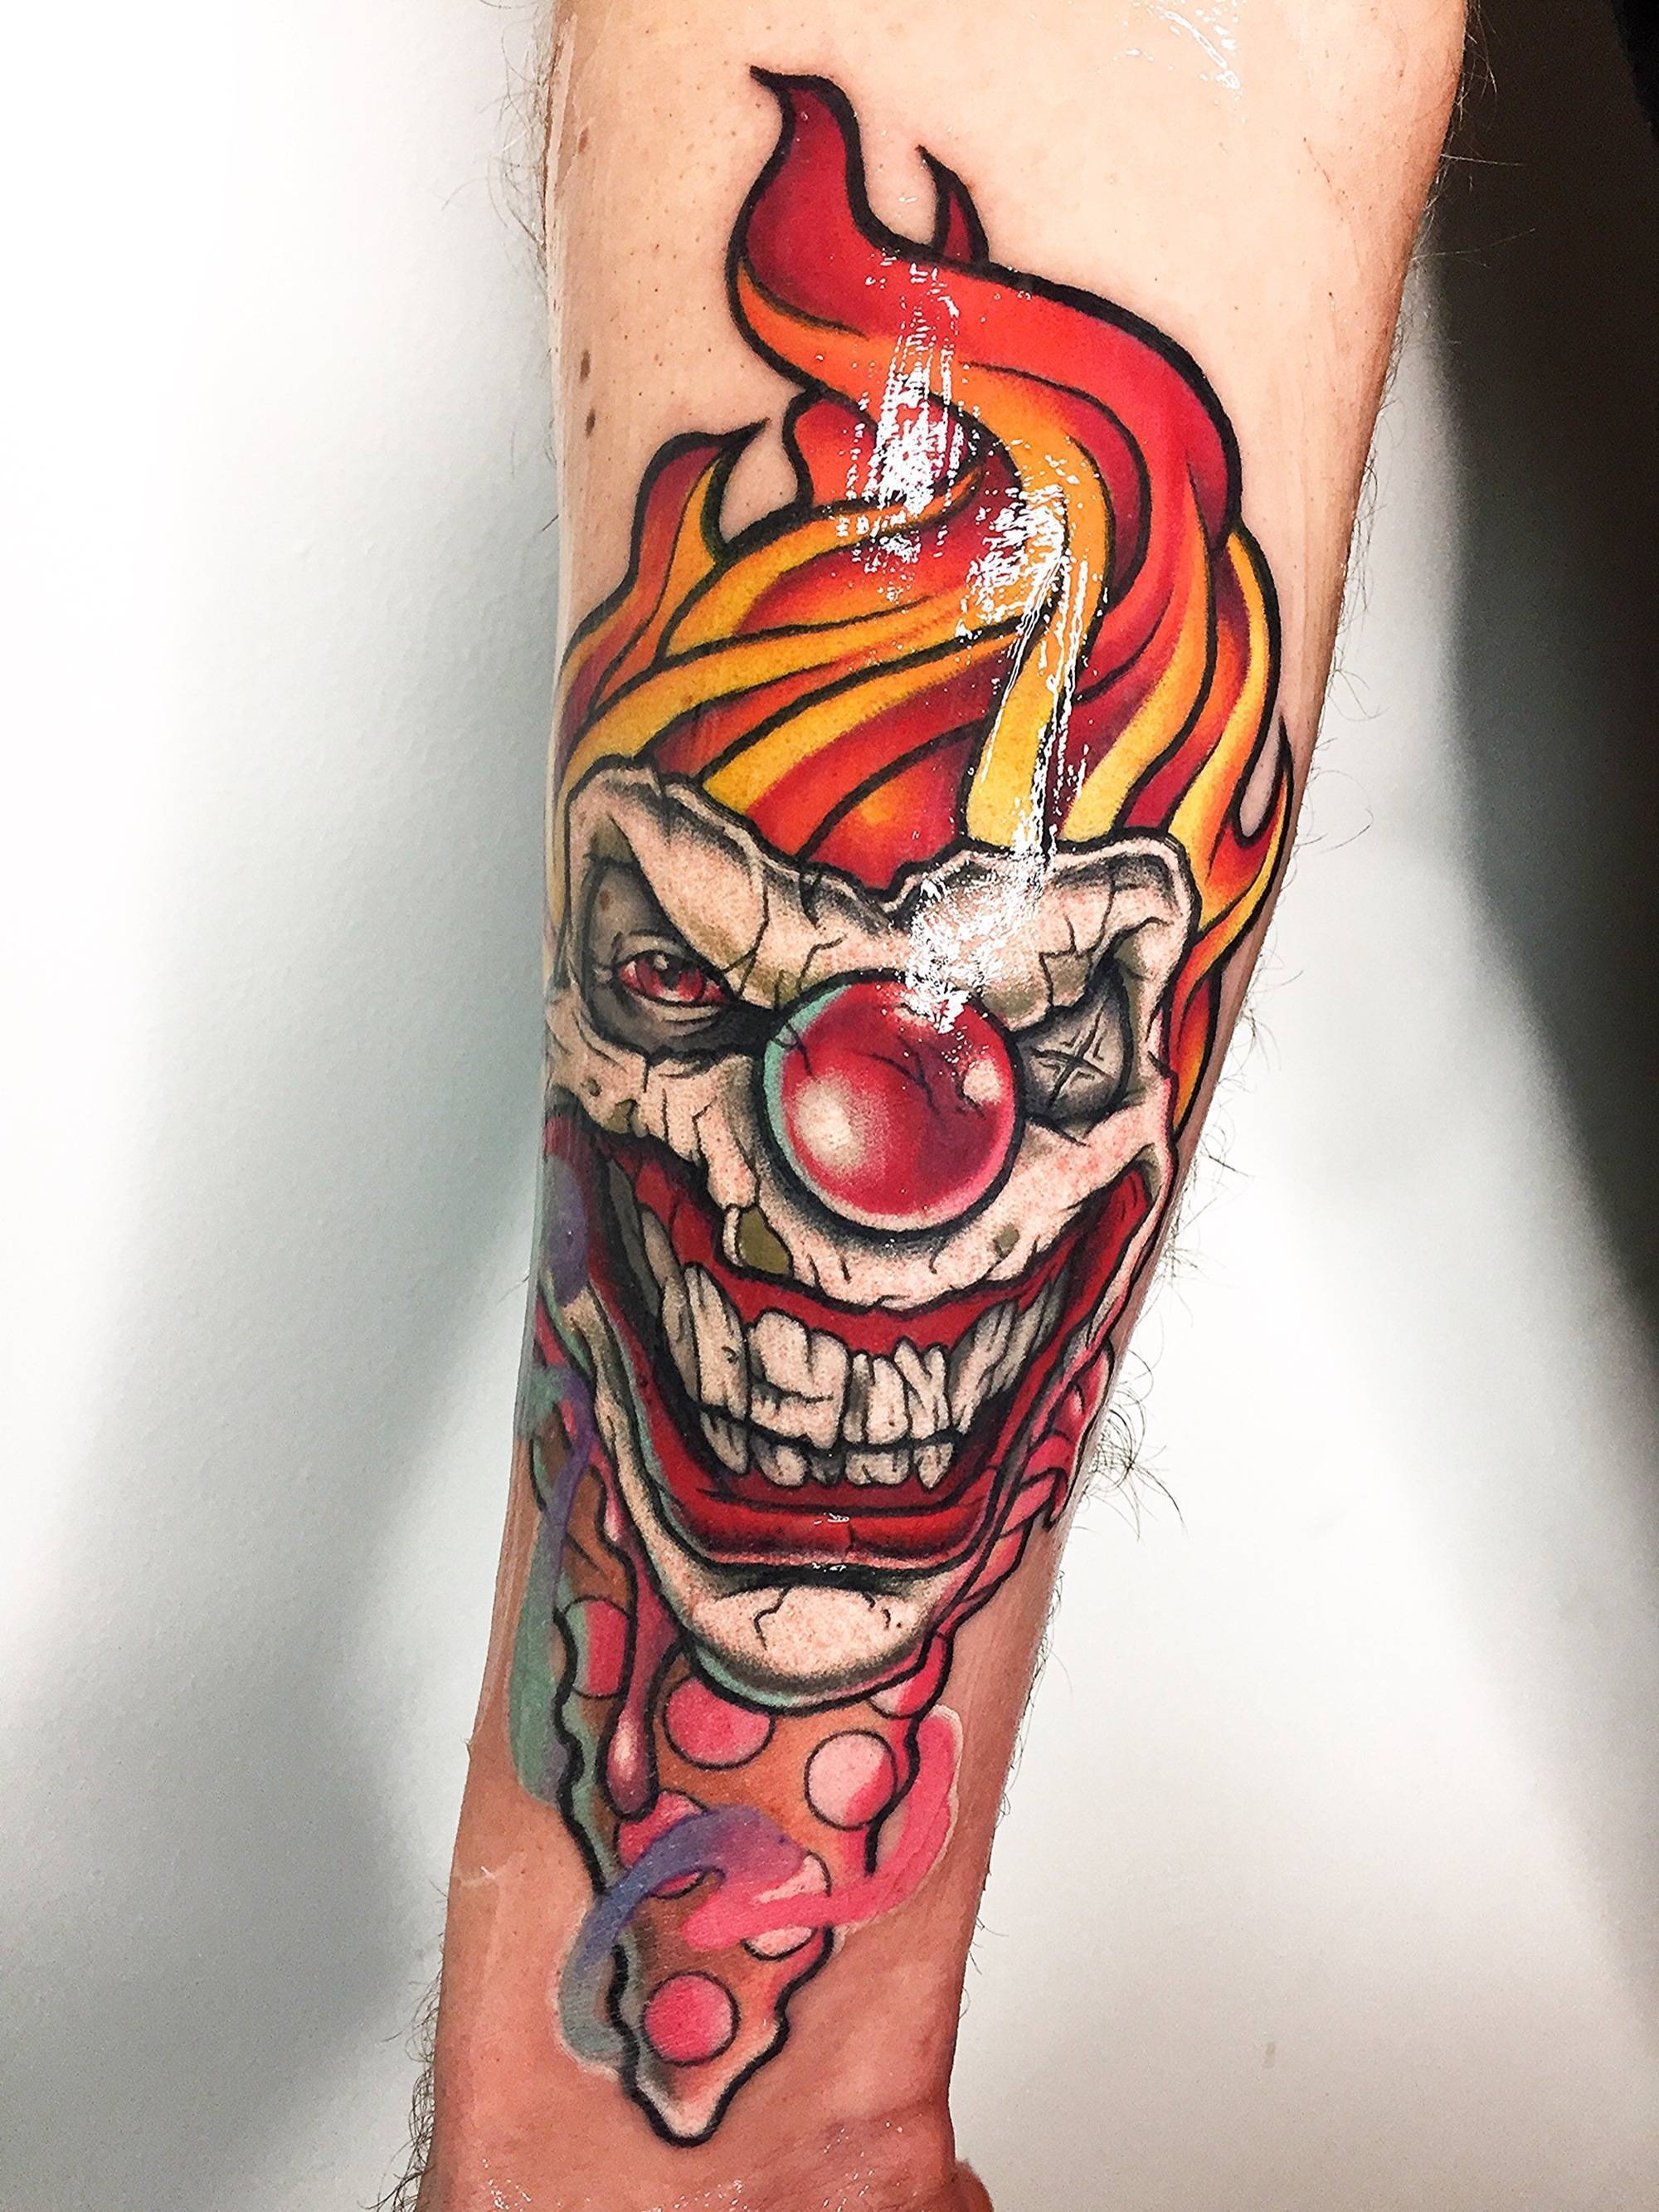 Intenze Tattoo Ink  Entertain a clown and you become part of the circus  Done by rithiefamilyink intenze intenzeink intenzetattoo  intenzeproducts intenzeartist intenzefamly colorink colortattoo art  artwork bodyart inked inkedup tatted 